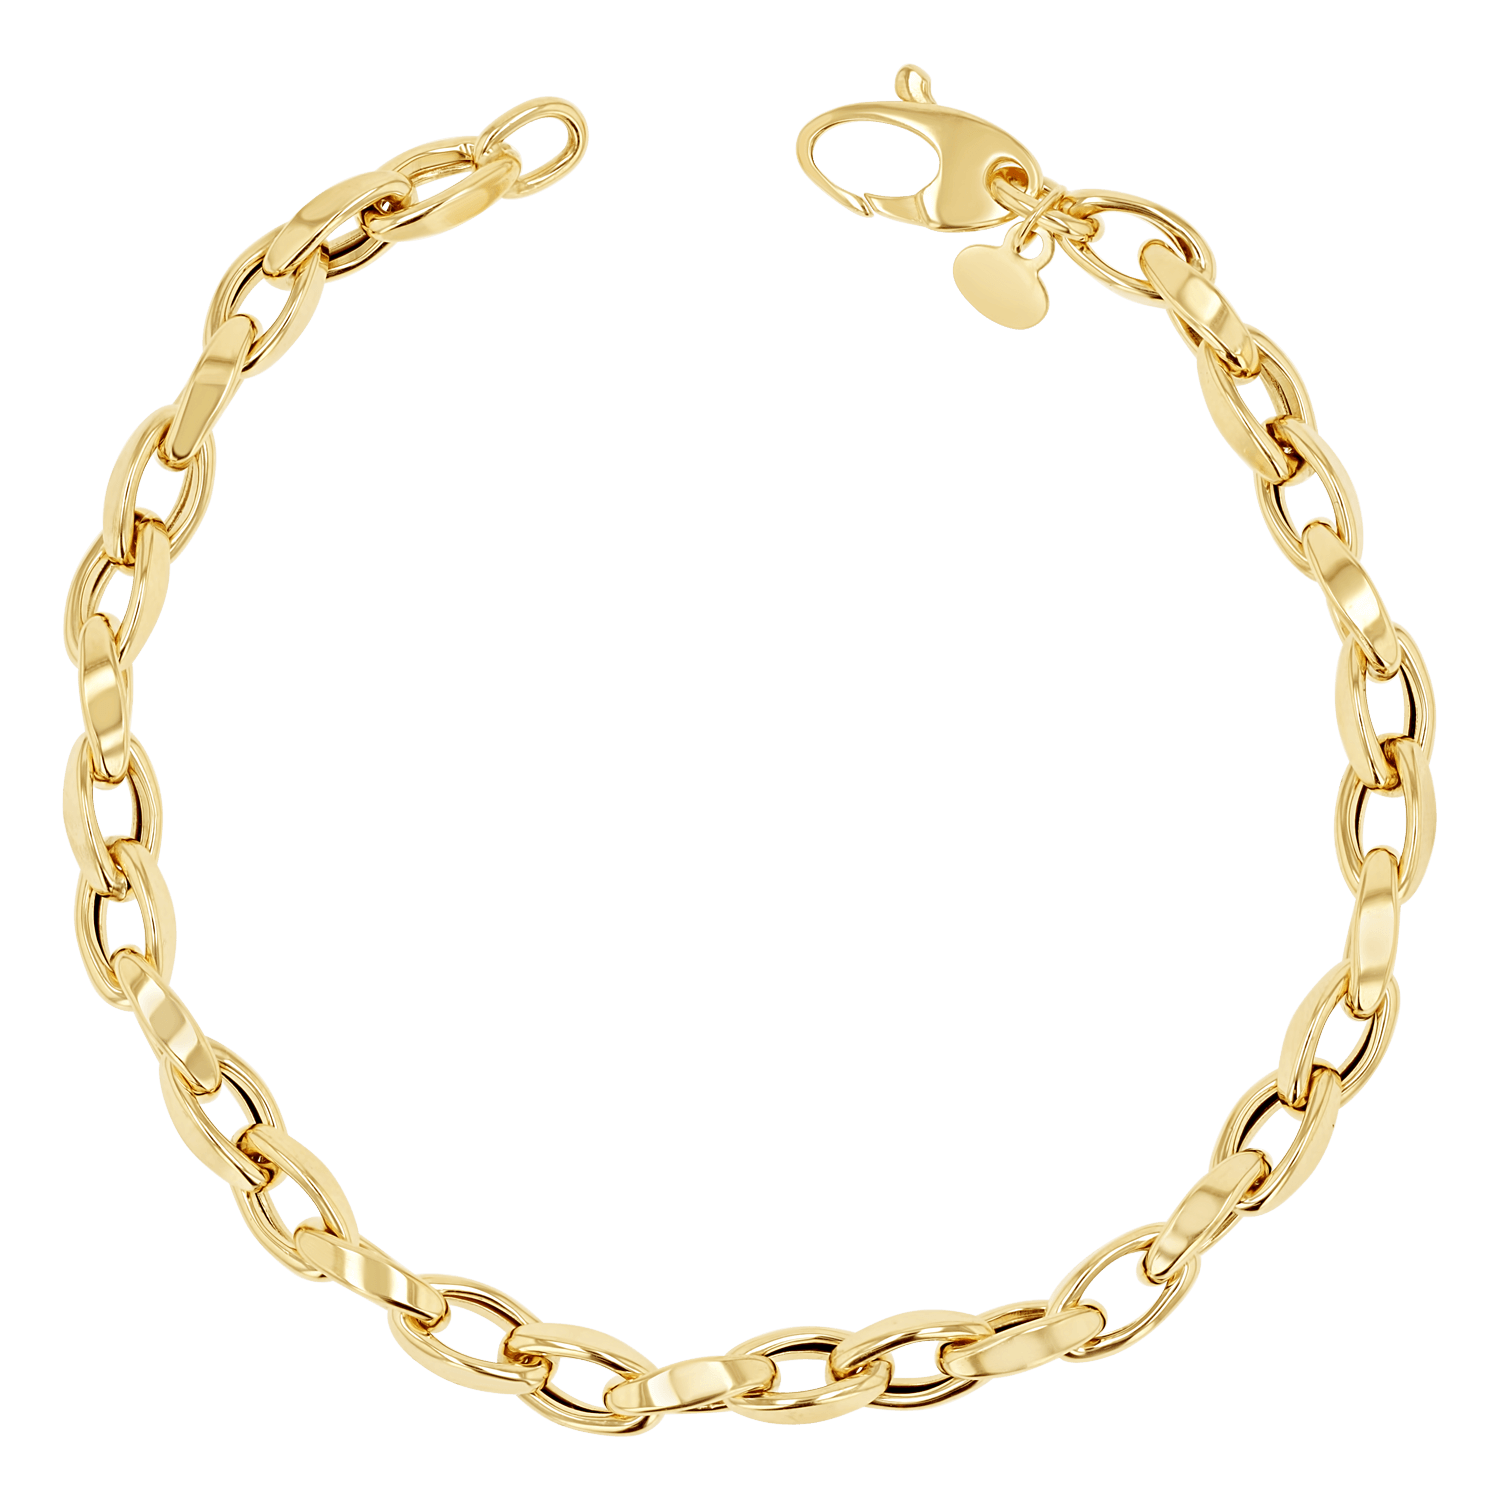 Celine Gold Curb Chain Bracelet  Rent Celine jewelry for $55/month